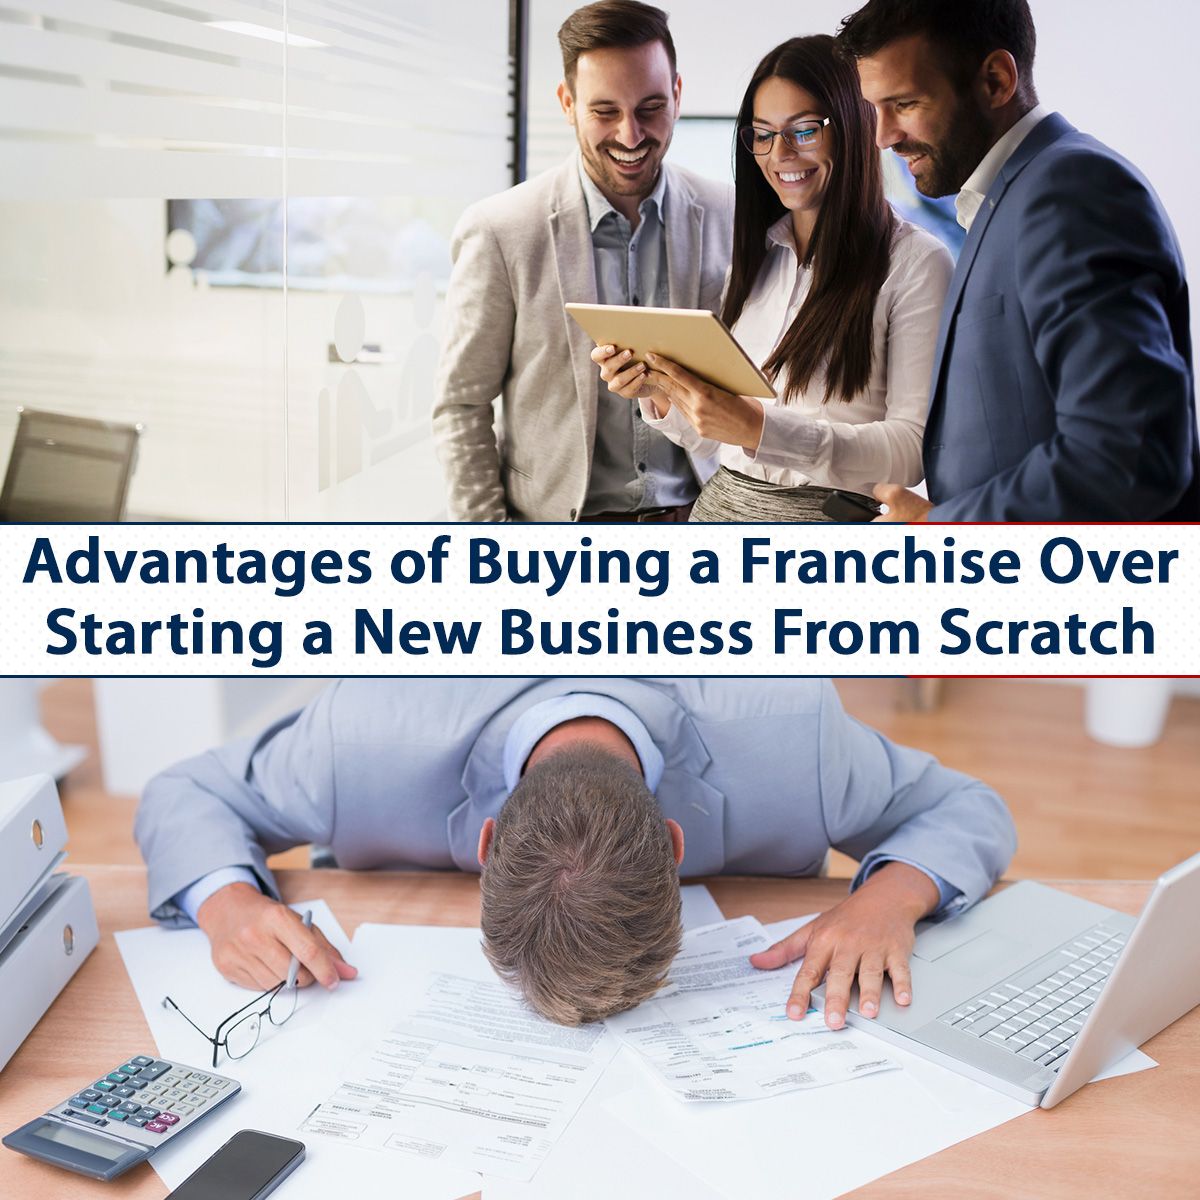 Advantages of Buying a Franchise Over Starting a New Business From Scratch